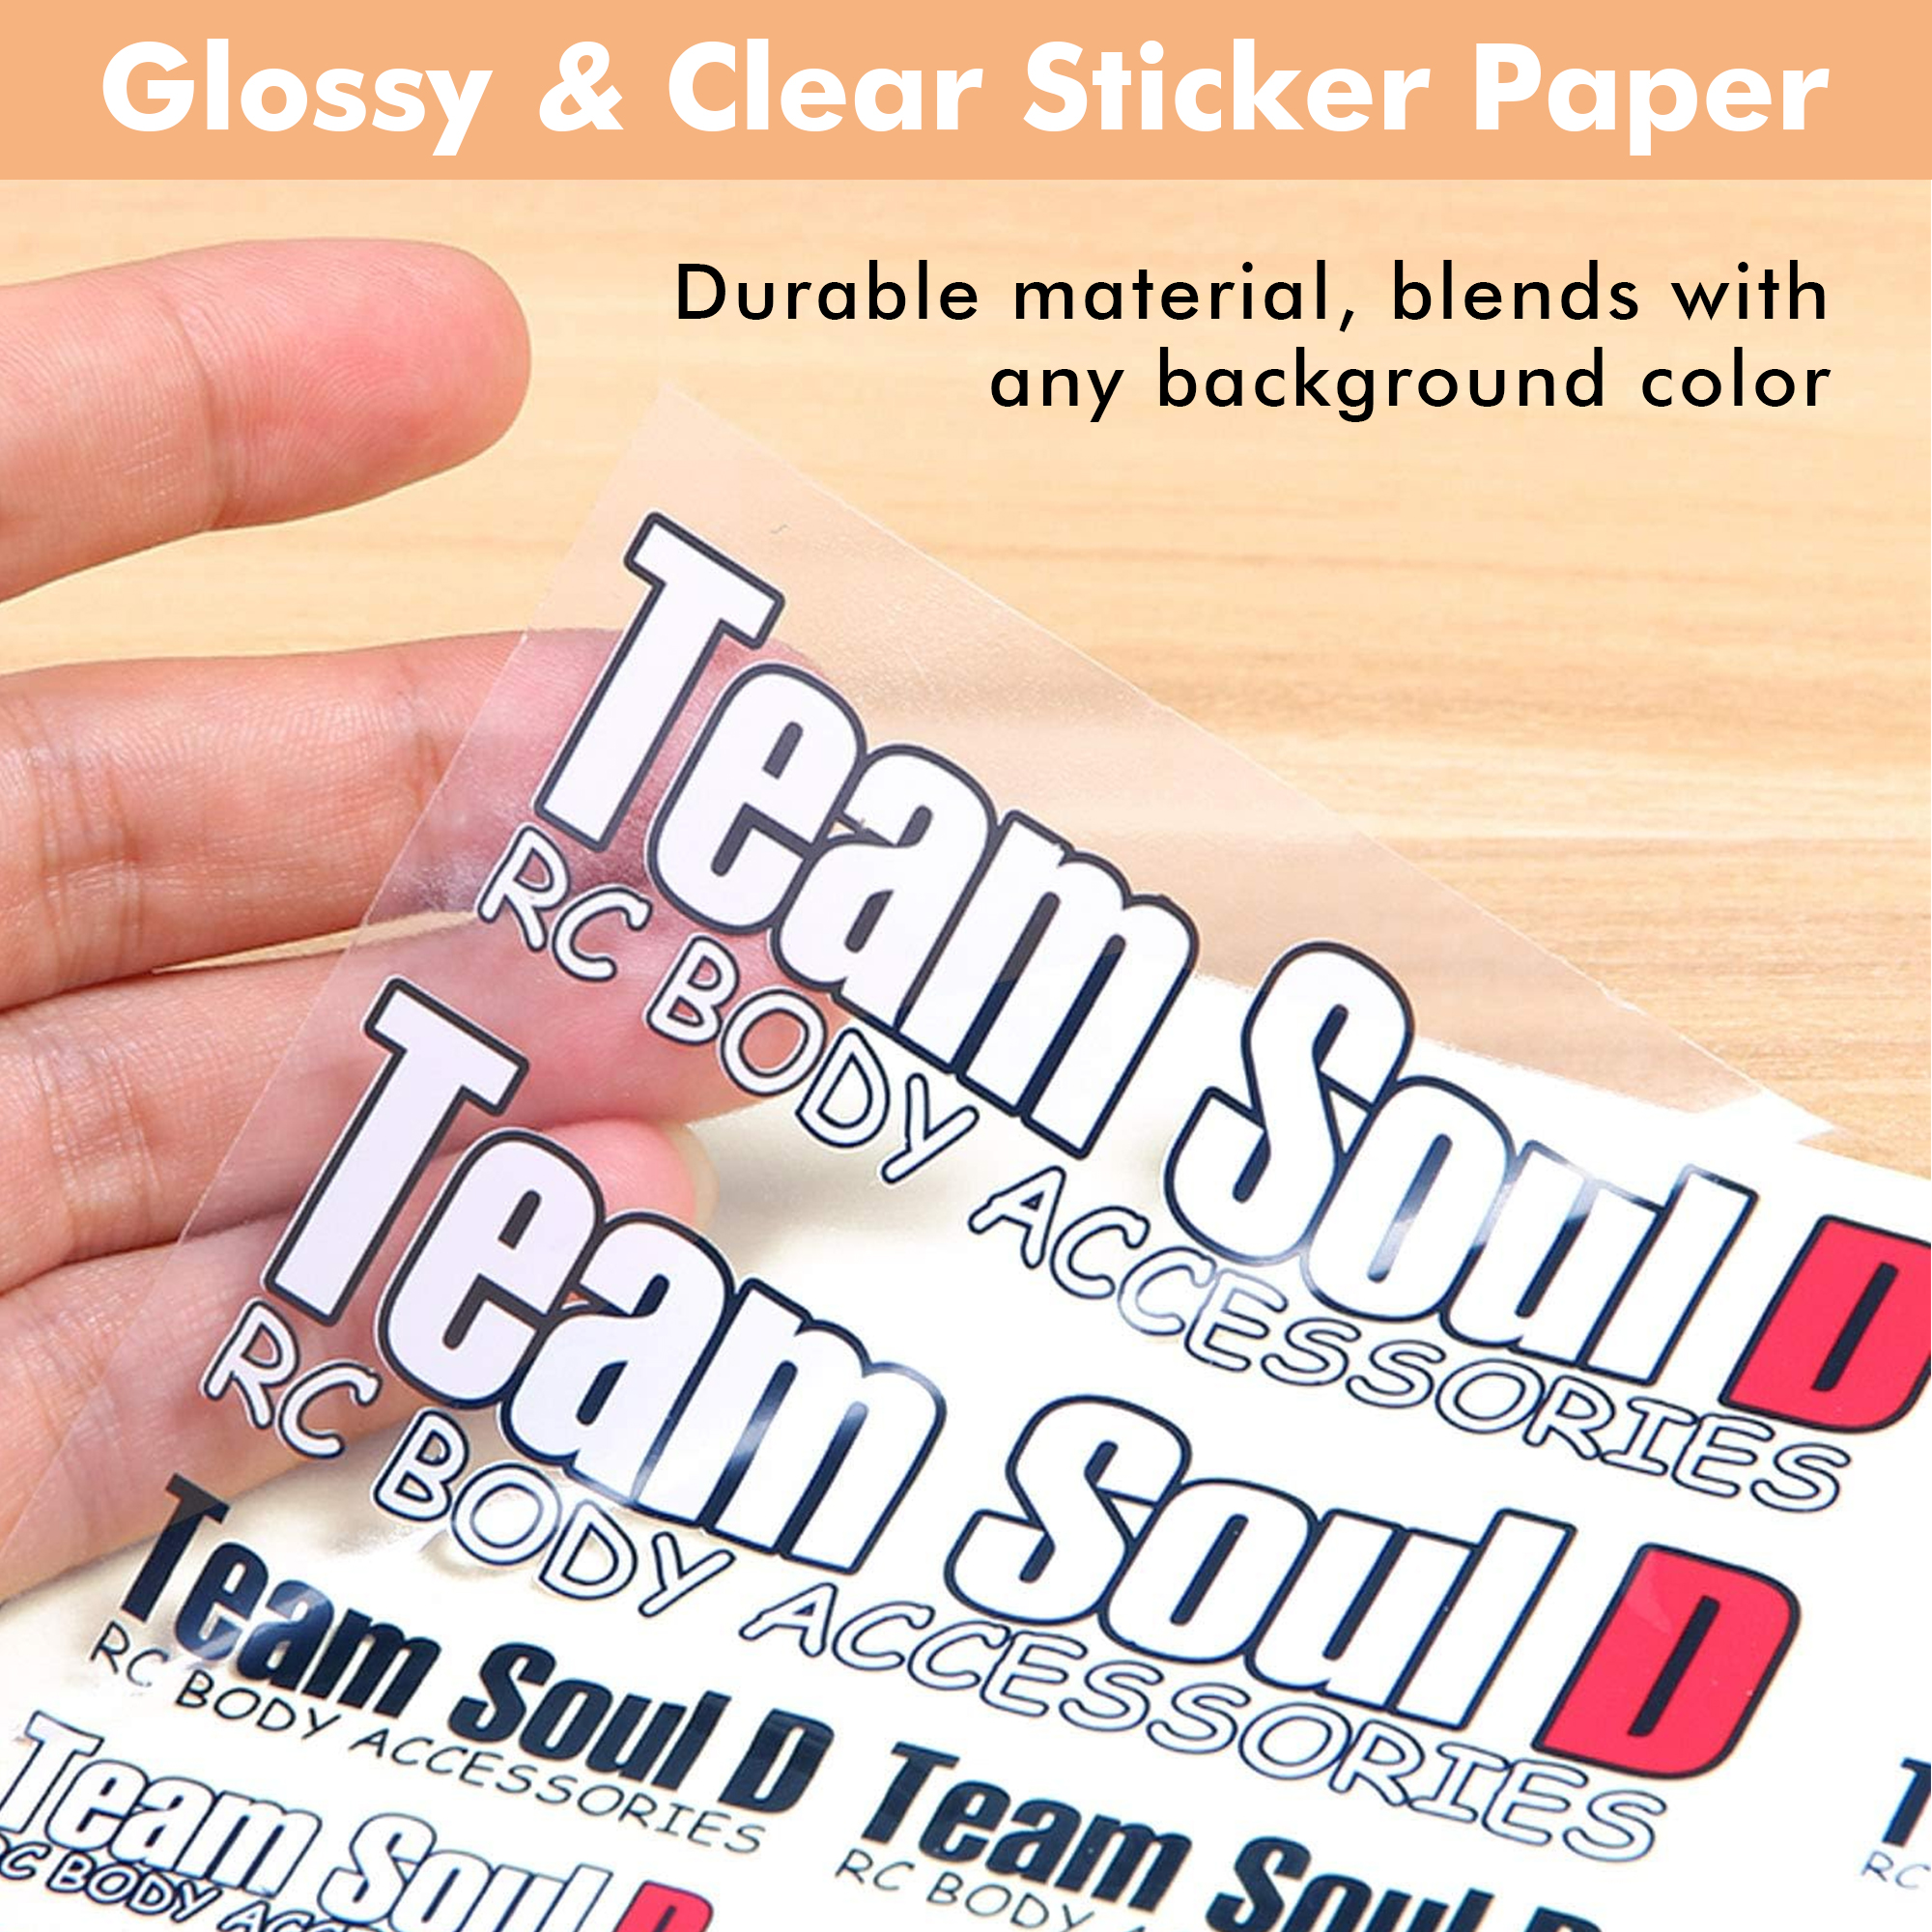 Bulk 45 Sheets A-sub Printable Clear Sticker Paper for Inkjet Printers - Waterproof Transparent Printable Vinyl Sheets 8.5x11 inch Glossy Label for